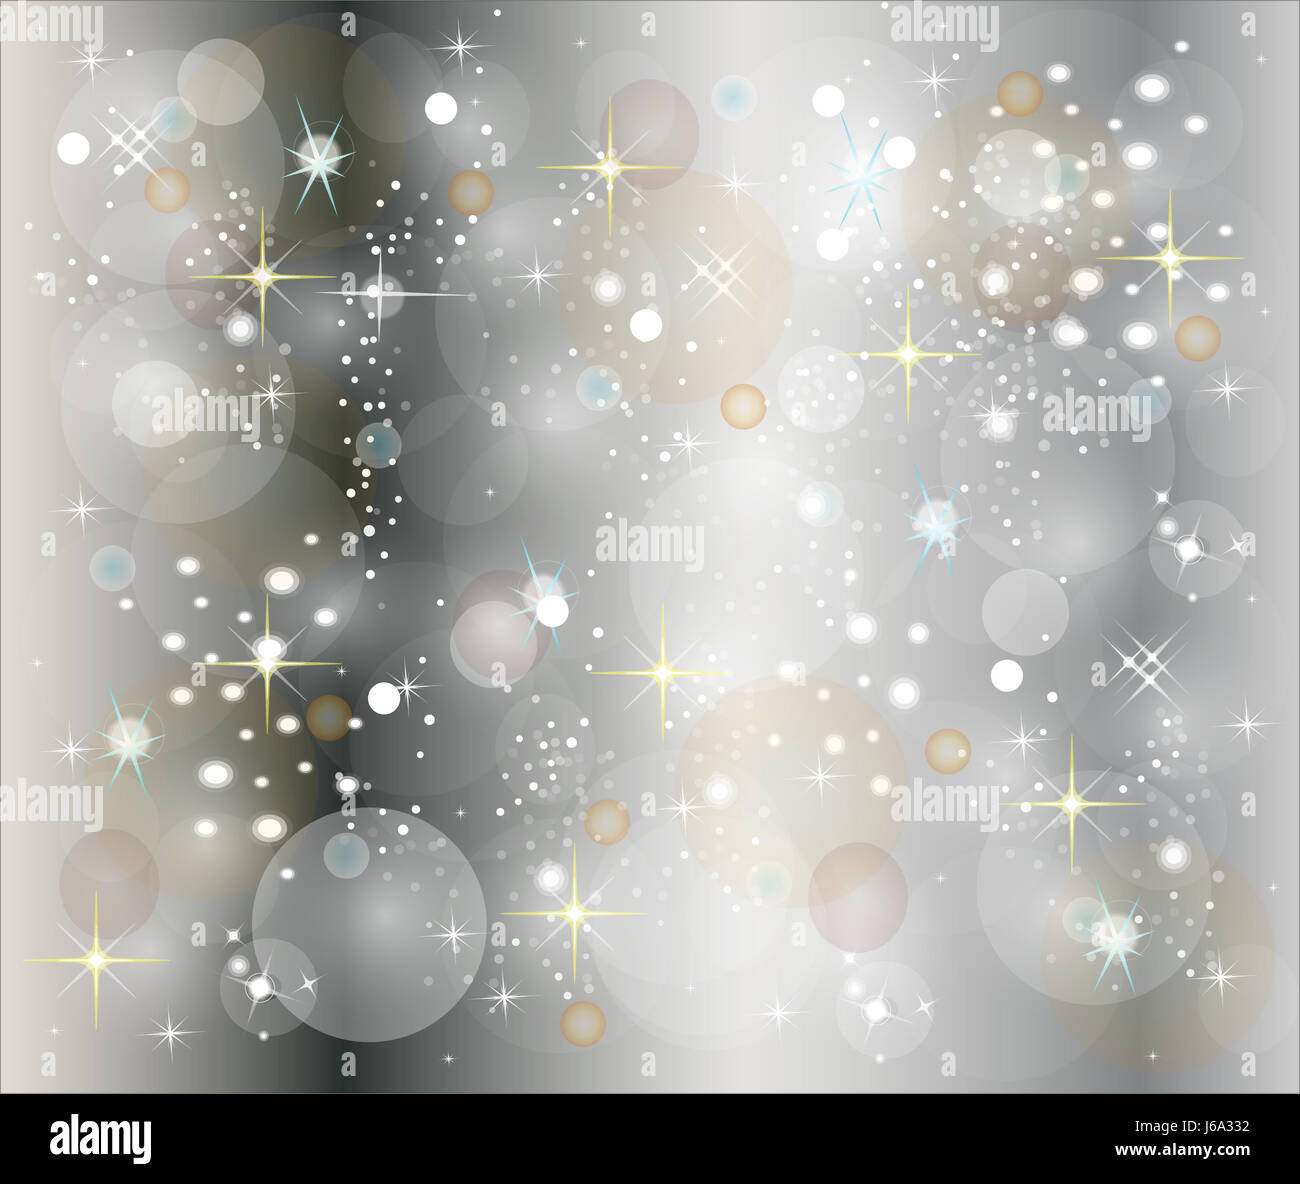 abstract stars asterisks graphic conspicuous pictographic transparent backdrop Stock Photo